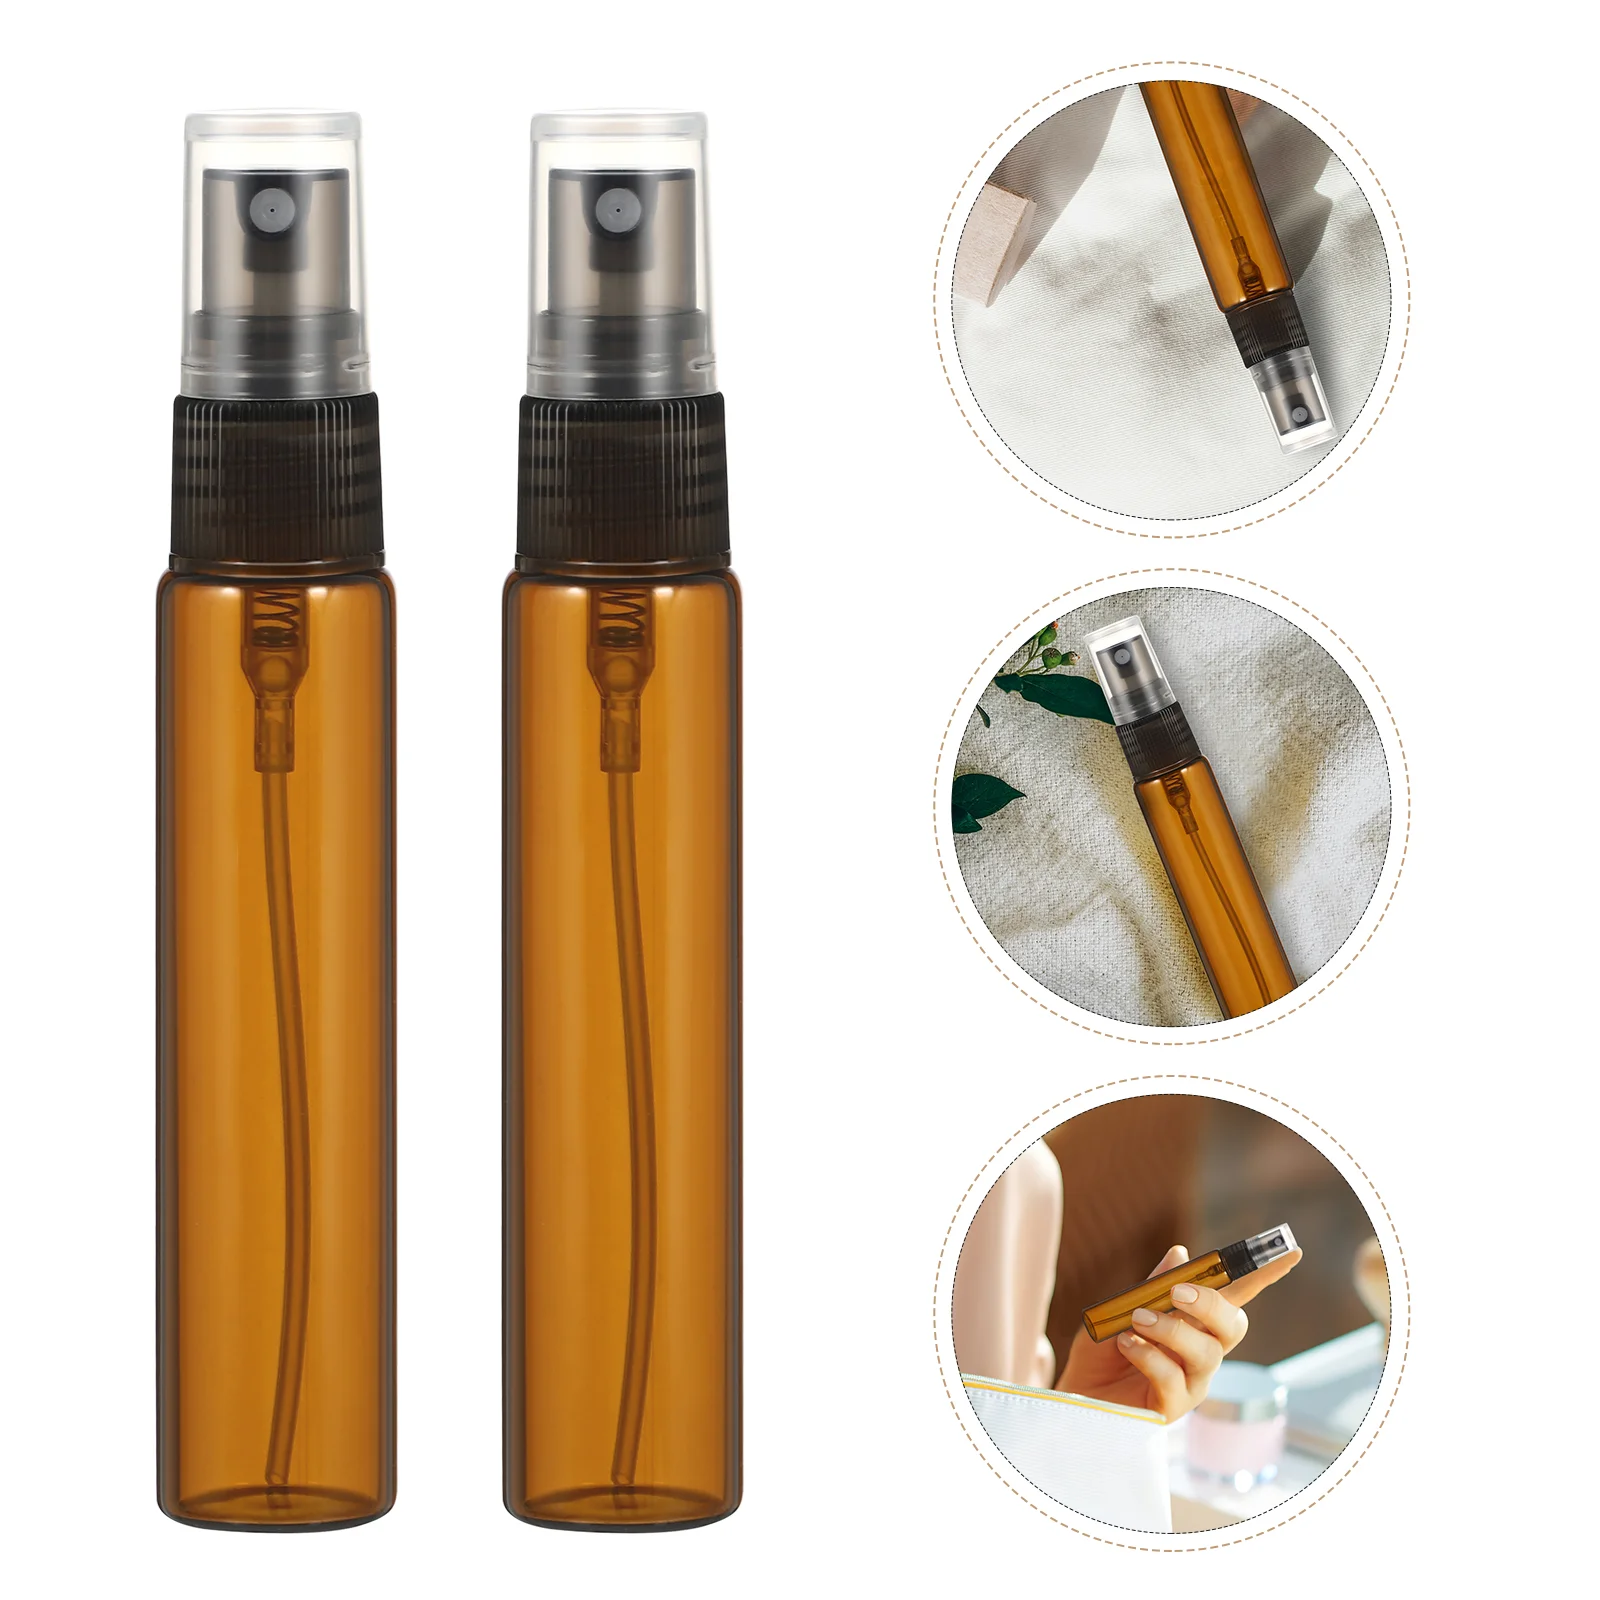 10 Pcs Travel Bottles Travel Container Mist Sprayers Essential Oils Clear Container Perfume Bottle Perfume Refillable